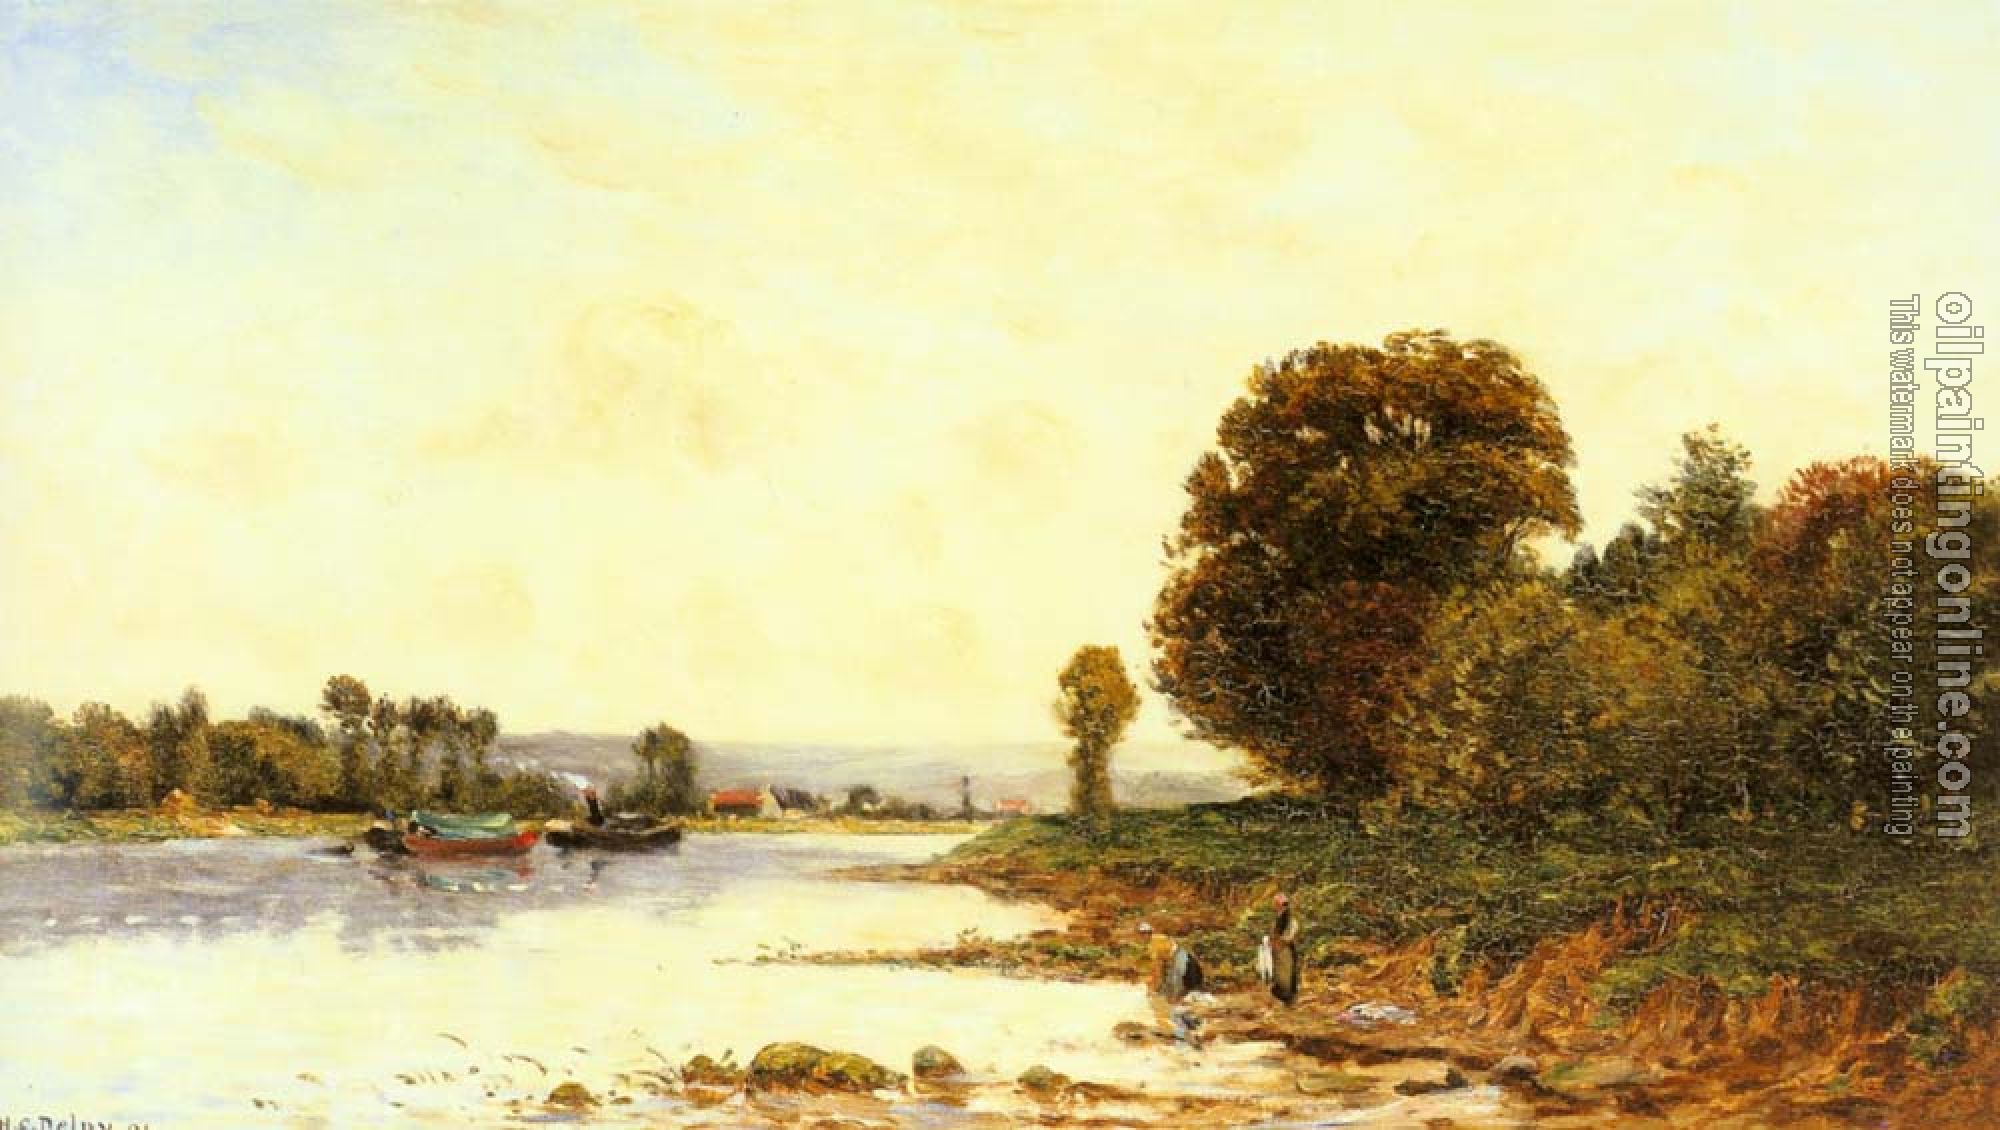 Delpy, Hippolyte Camille - Washerwomen in a River Landscape with Steamboats beyond